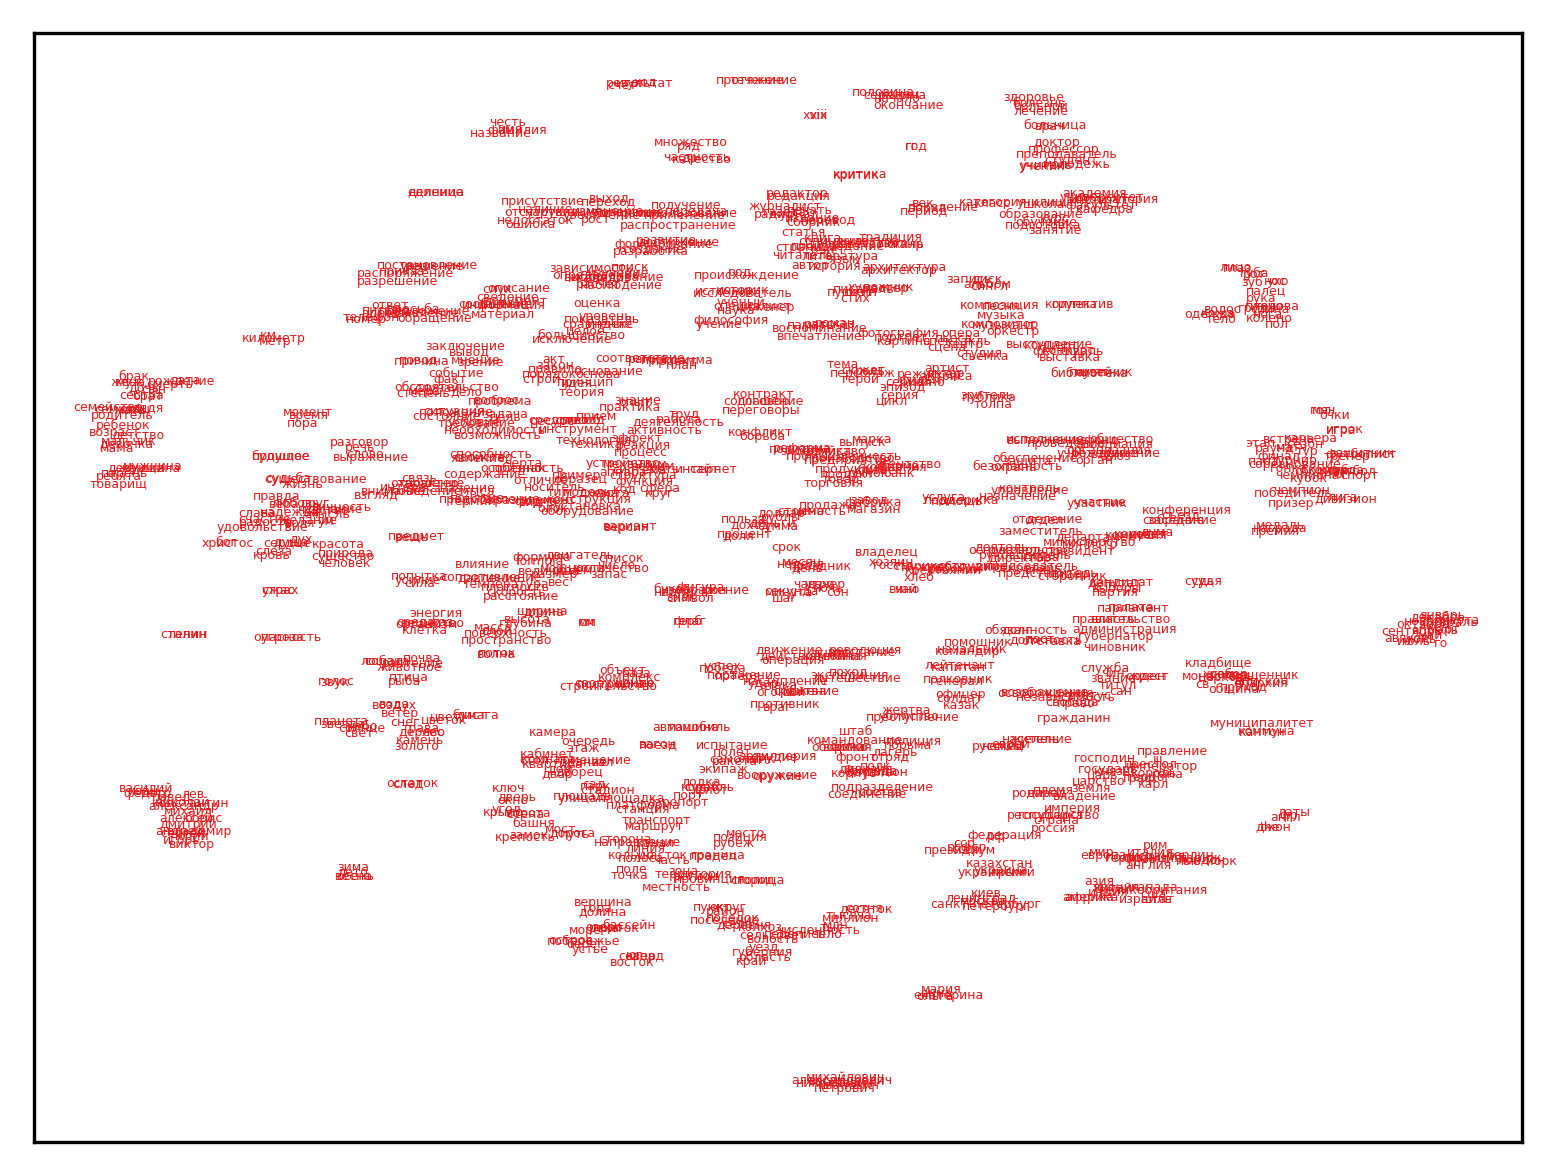 Plot for noun relations; click for full-size image